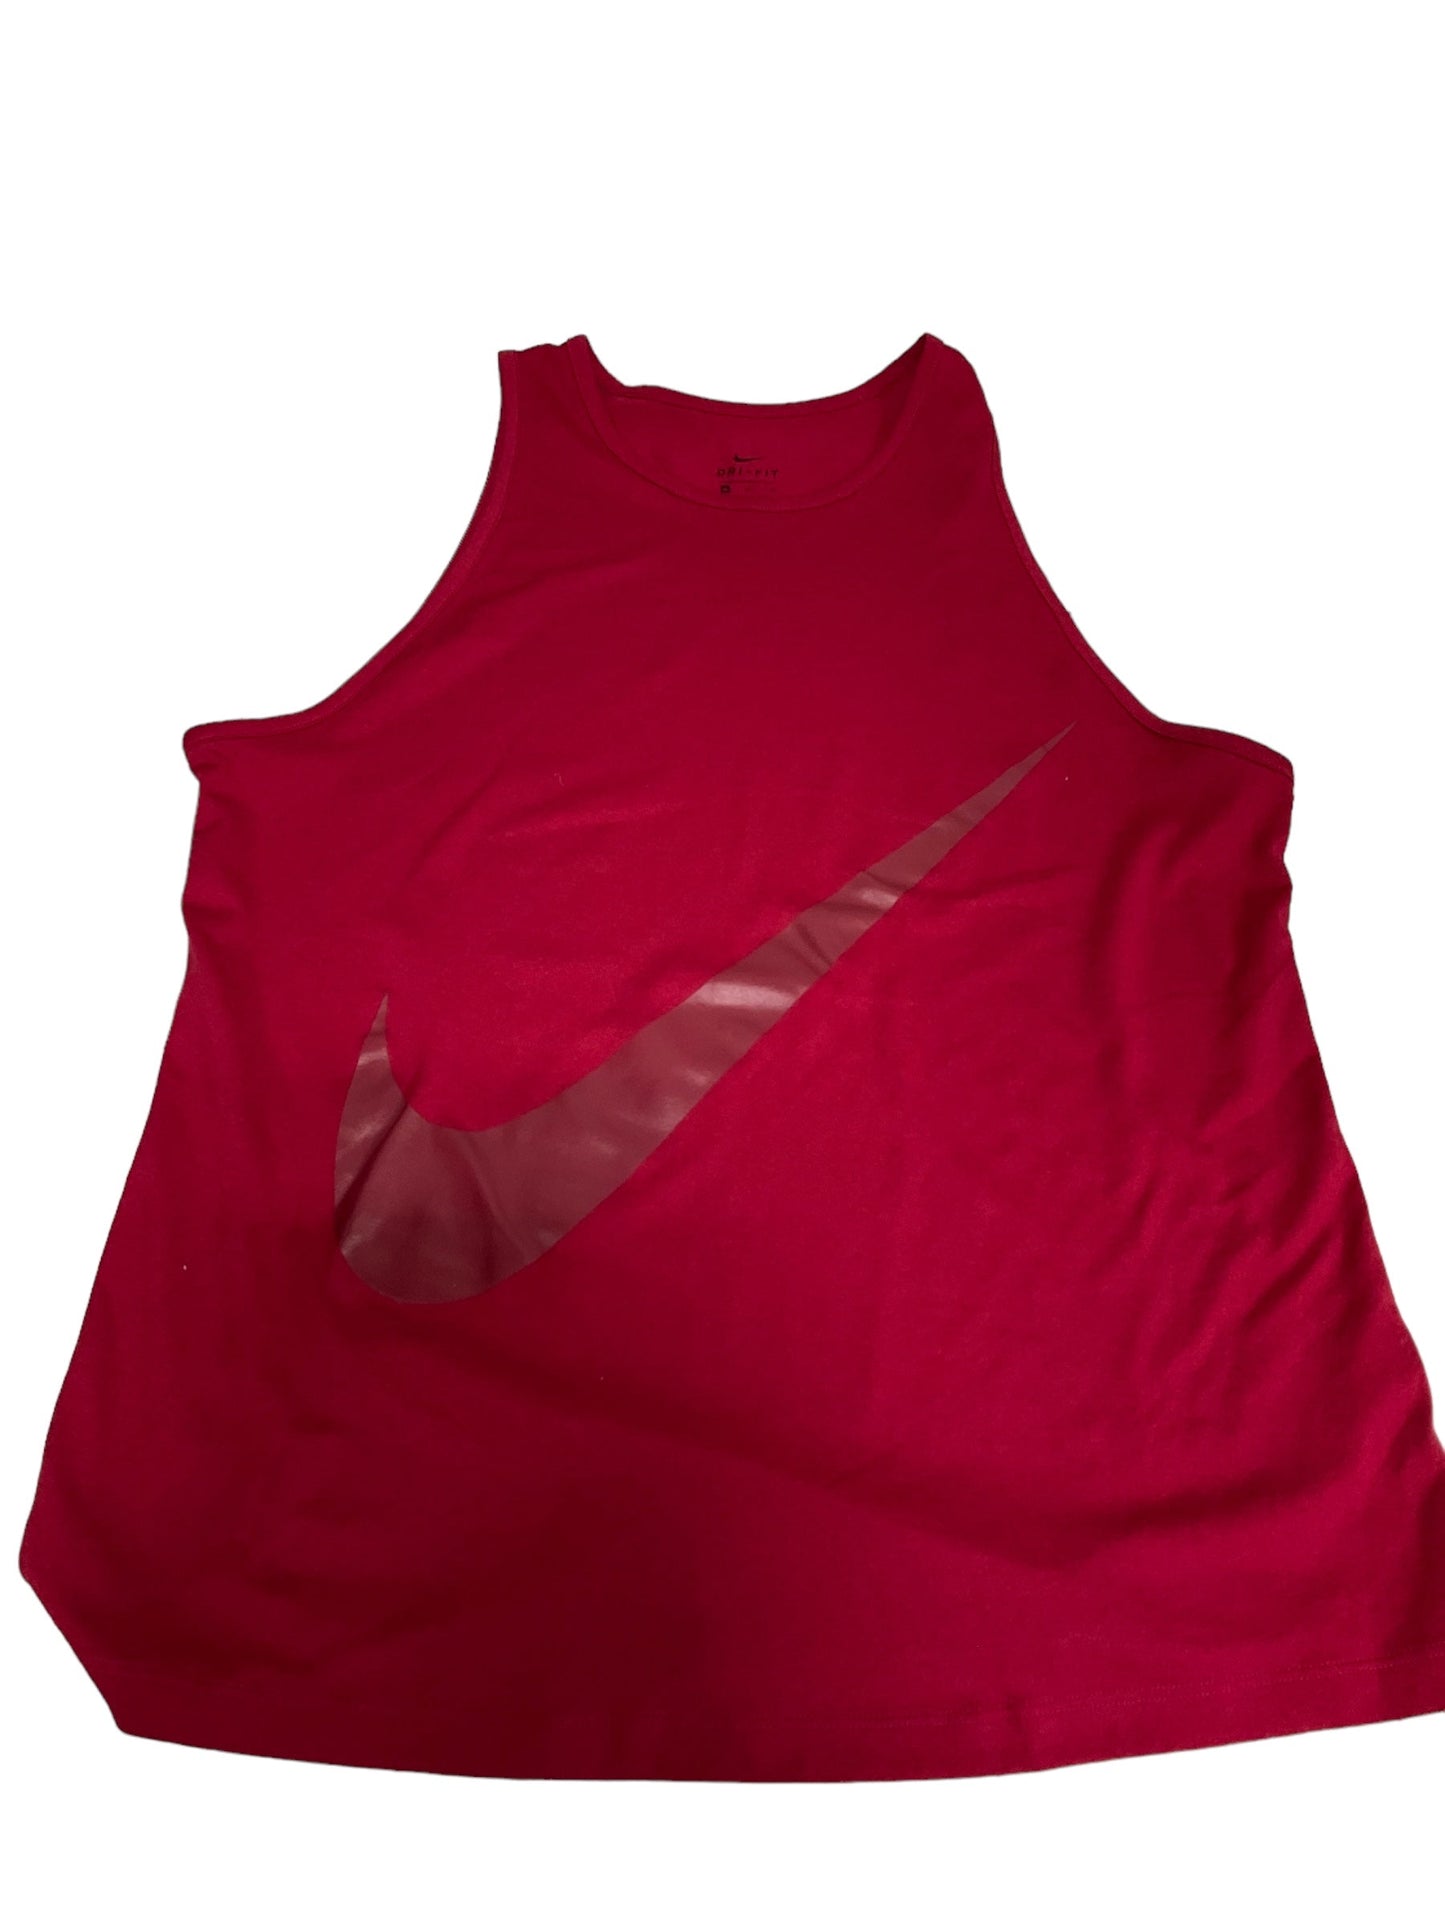 Red Athletic Tank Top Nike, Size M